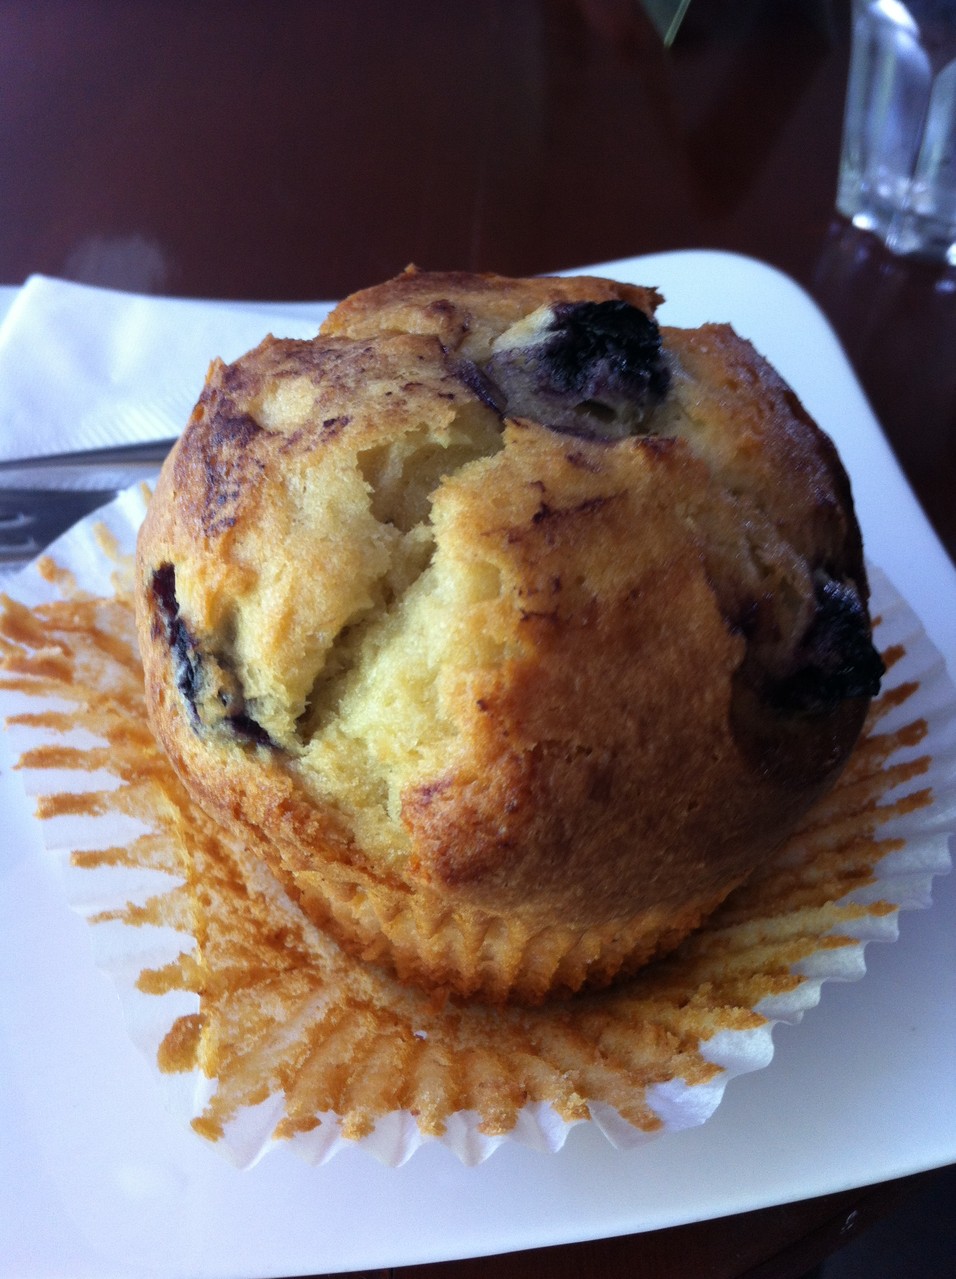 Blueberry muffin pour 1$